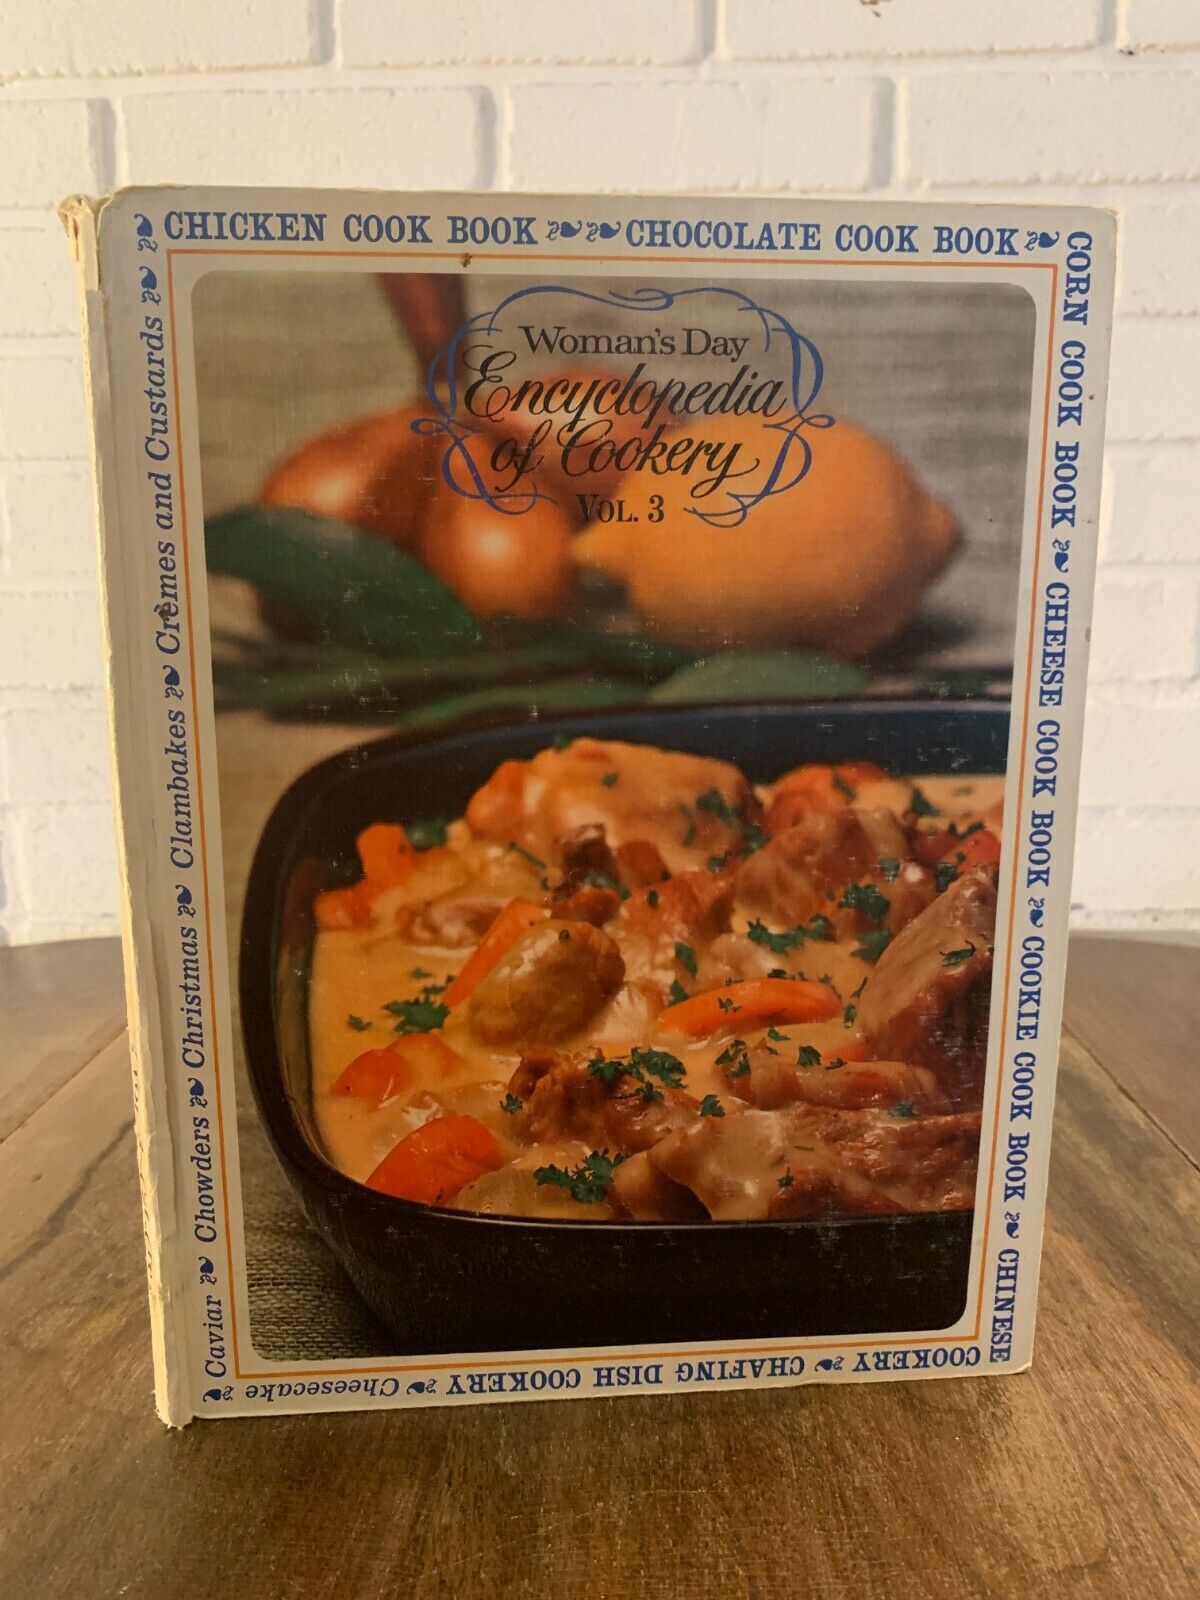 Woman's Day Encyclopedia of Cookery (Vol. 3 - Cat-Cre) 1966 Hardcover